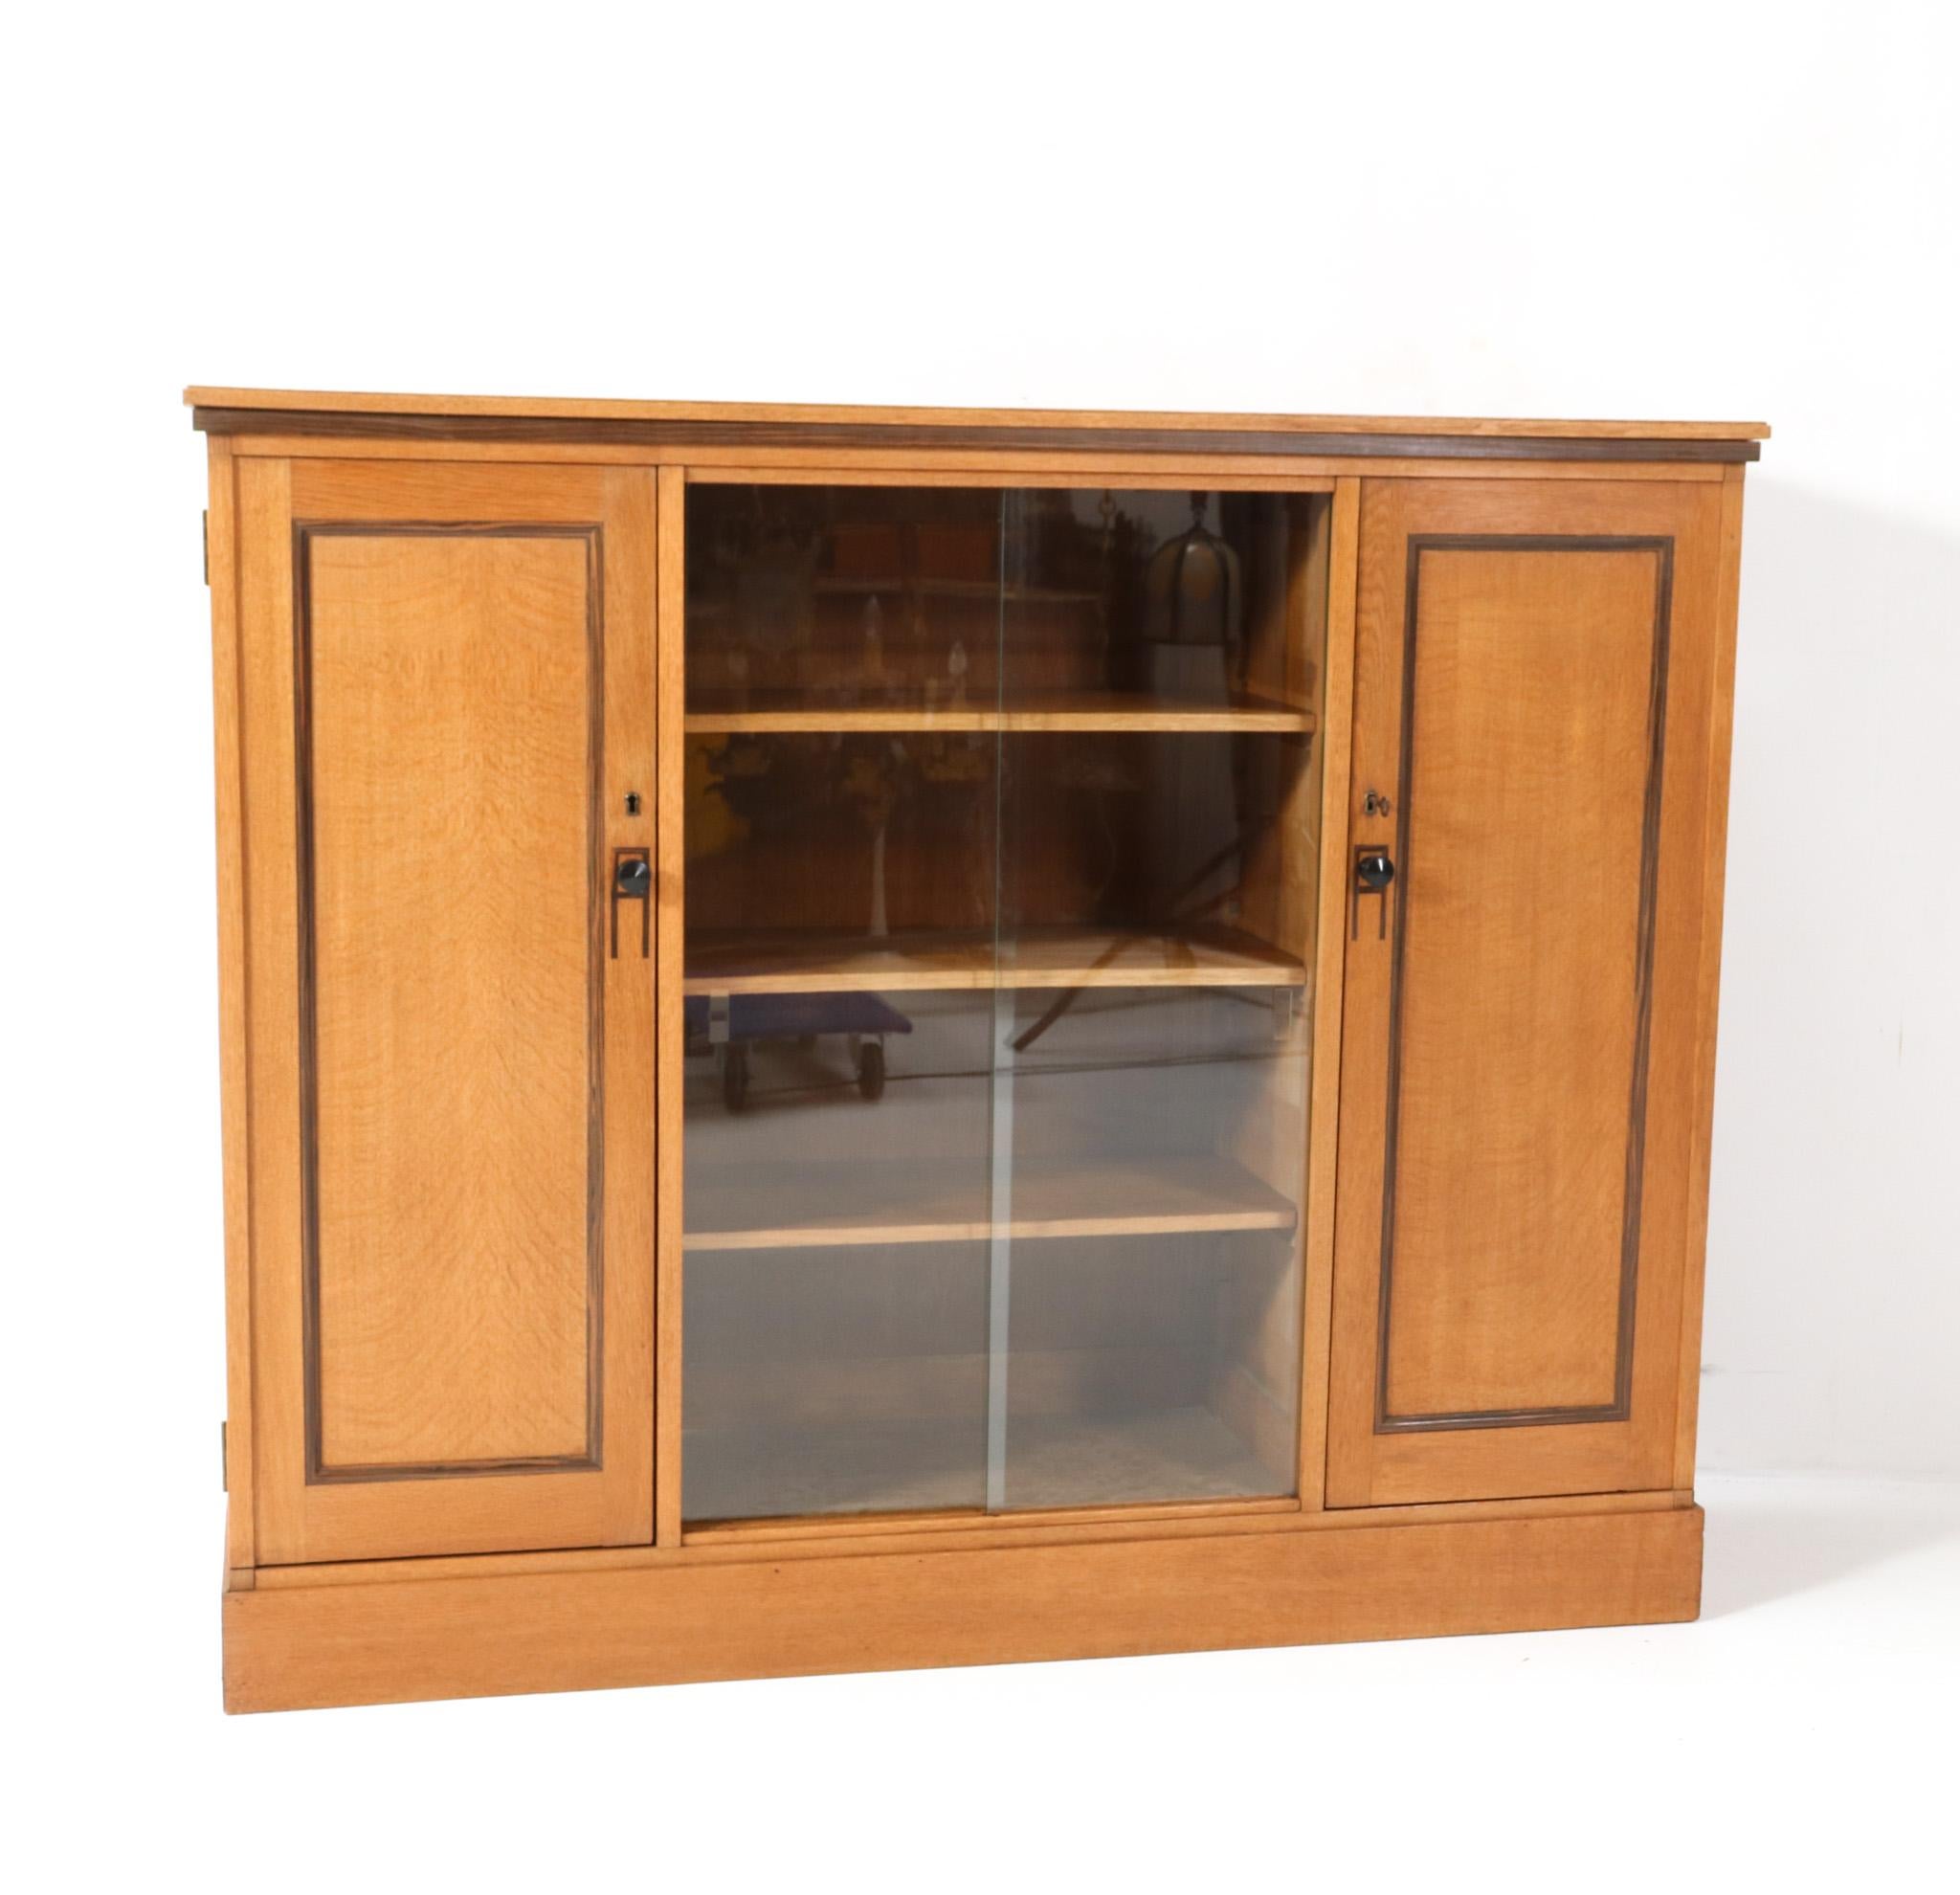 Early 20th Century Oak Art Deco Modernist Bookcase with Glass Sliding Doors, 1920s For Sale